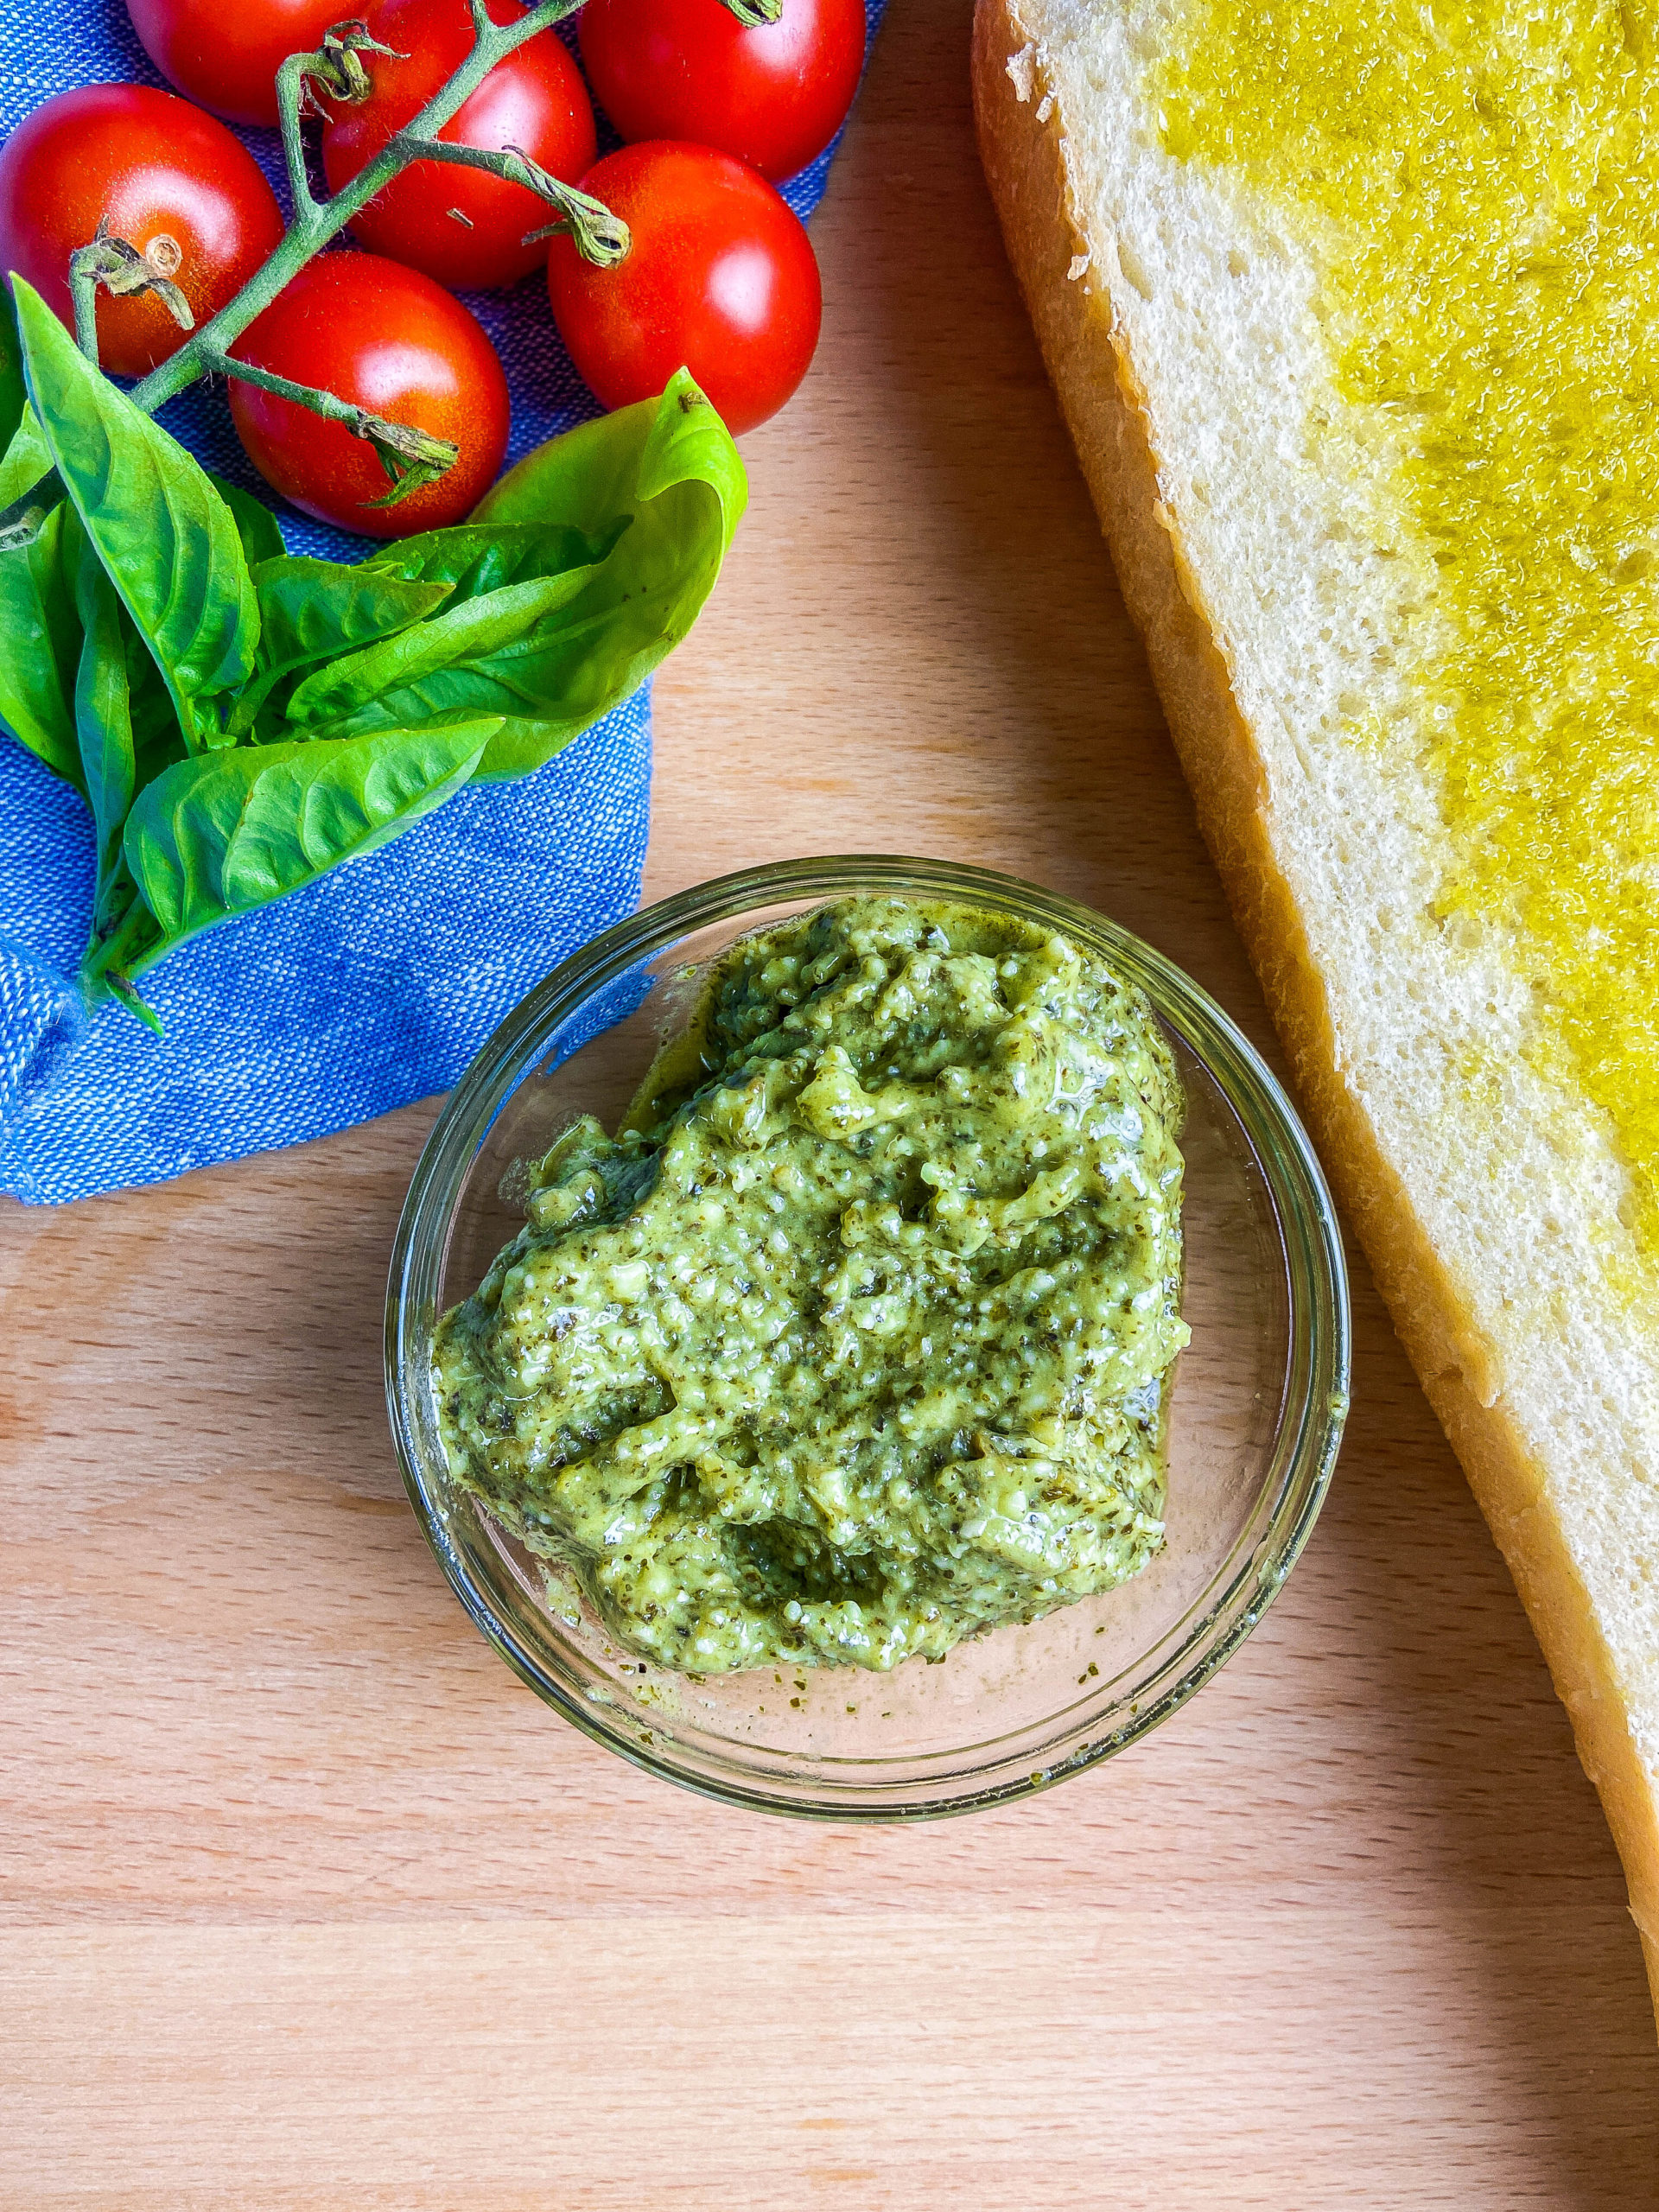 Overhead photo of pesto in a clear glass bowl. Loaf of bread, blue towel, basil and tomatoes on a wooden cutting board. 